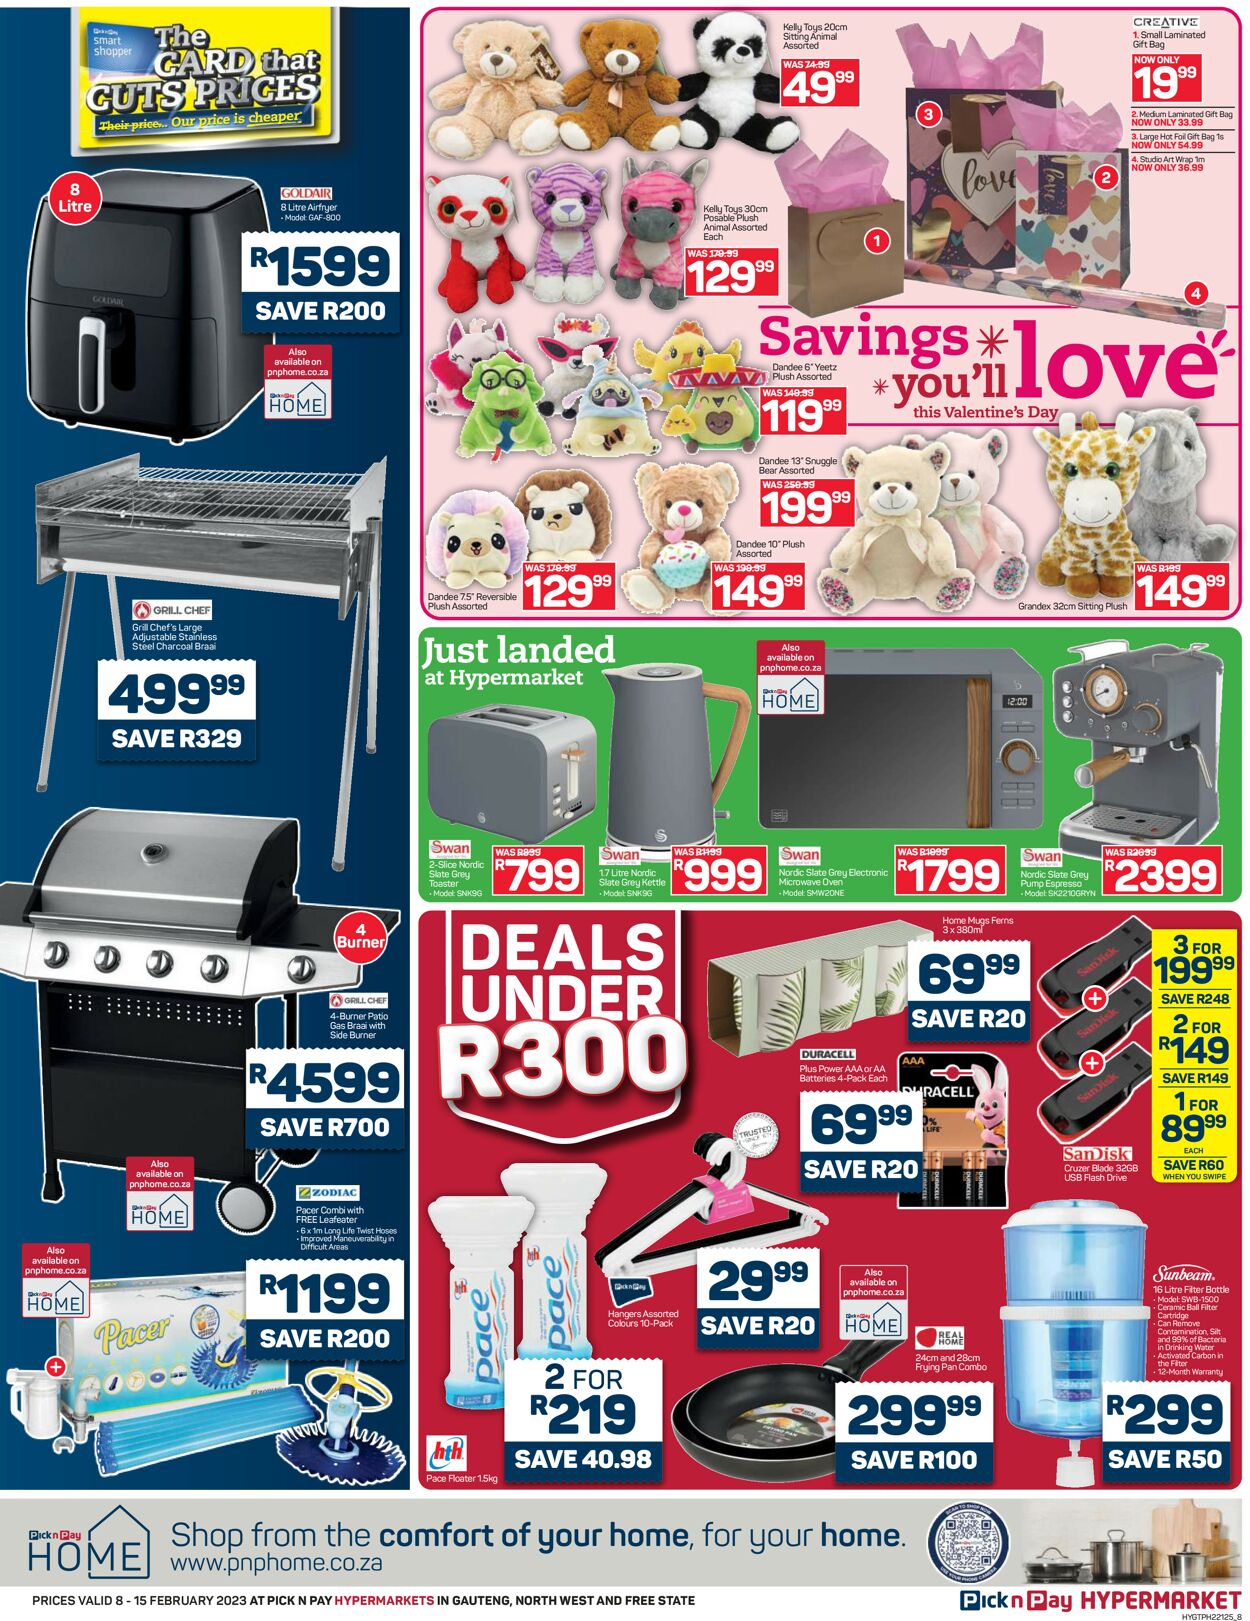 Pick n Pay Catalogue - 2023/02/08-2023/02/15 (Page 8)